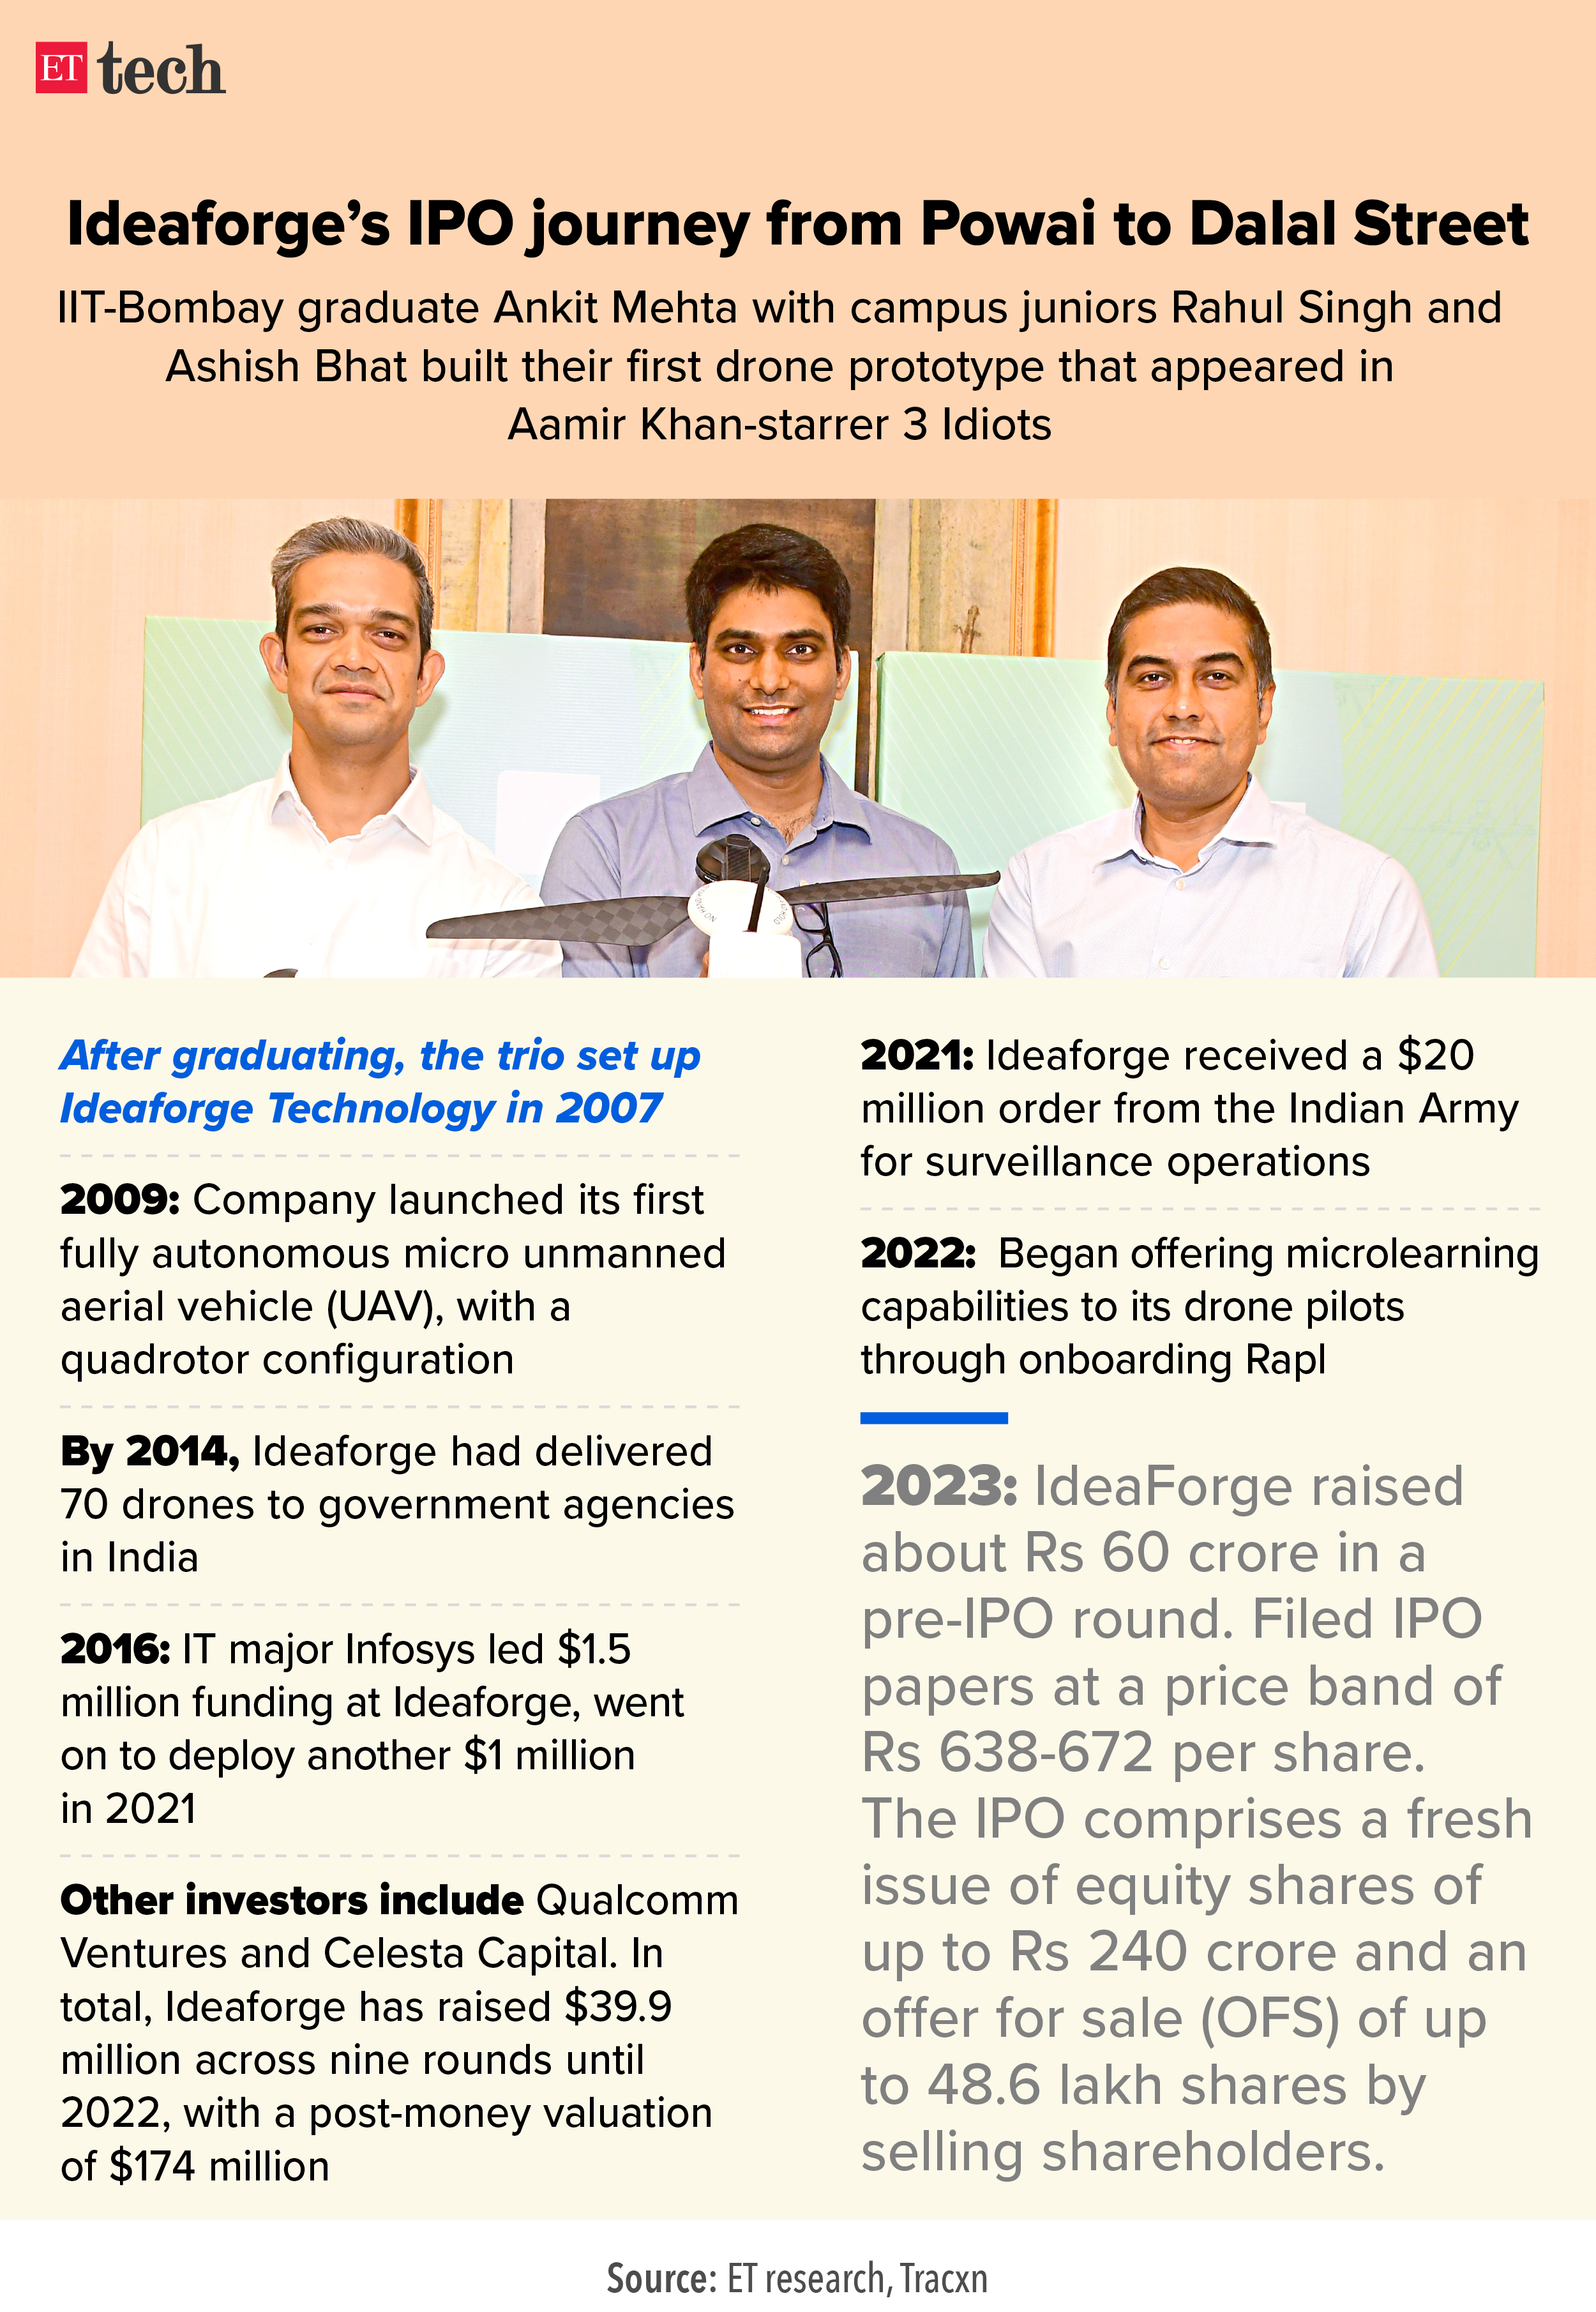 Ideaforge IPO journey from Powai to Dalal Street_Graphic_ETTECH